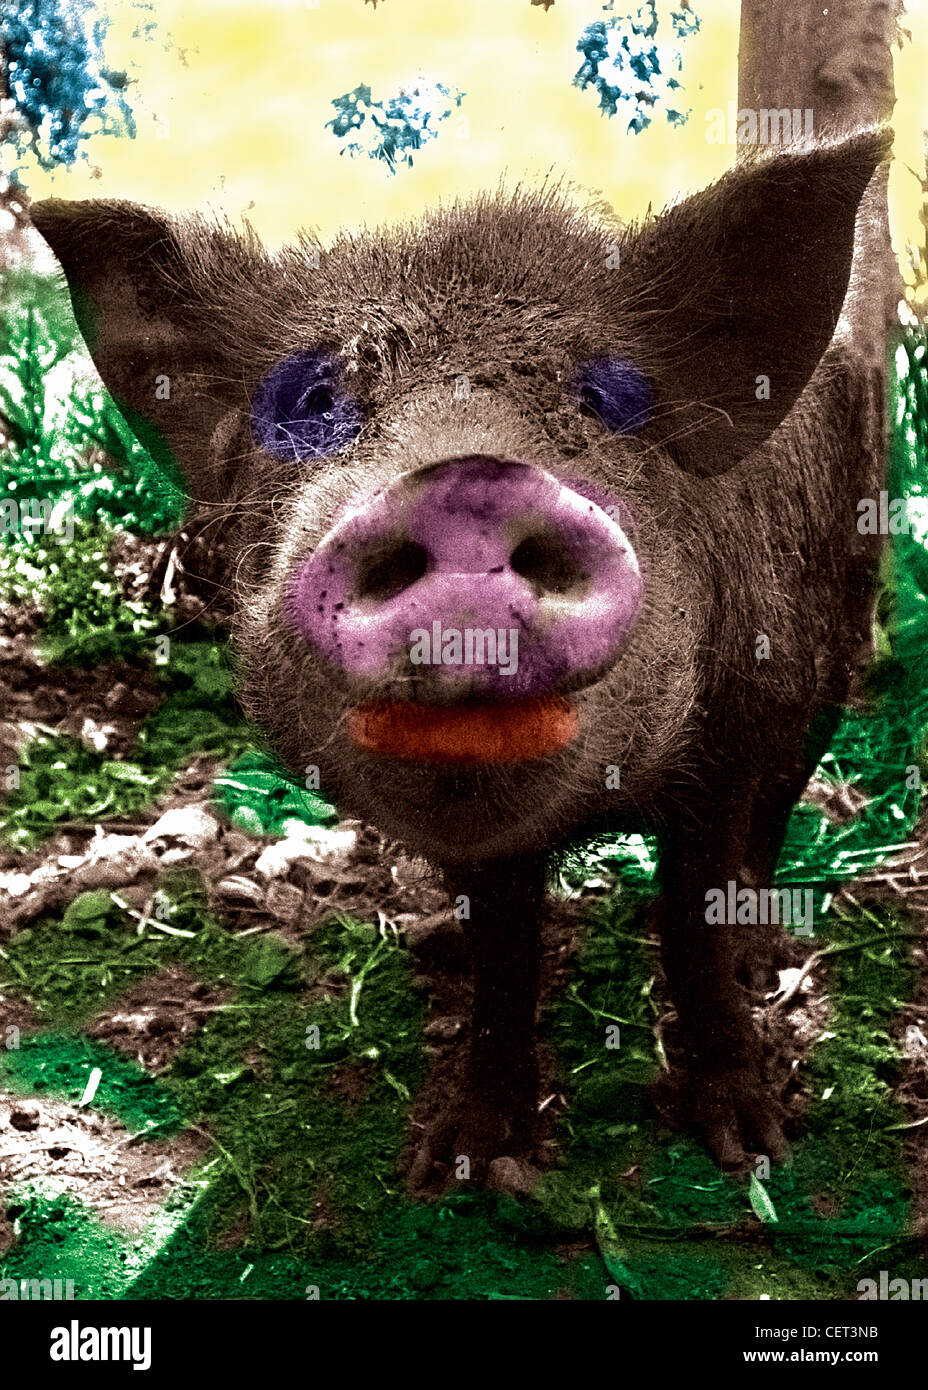 A large pig, close-up wide angle photograph.  Horizontal, hand colored sepia toned image.  Pink snout, fun humorous Stock Photo